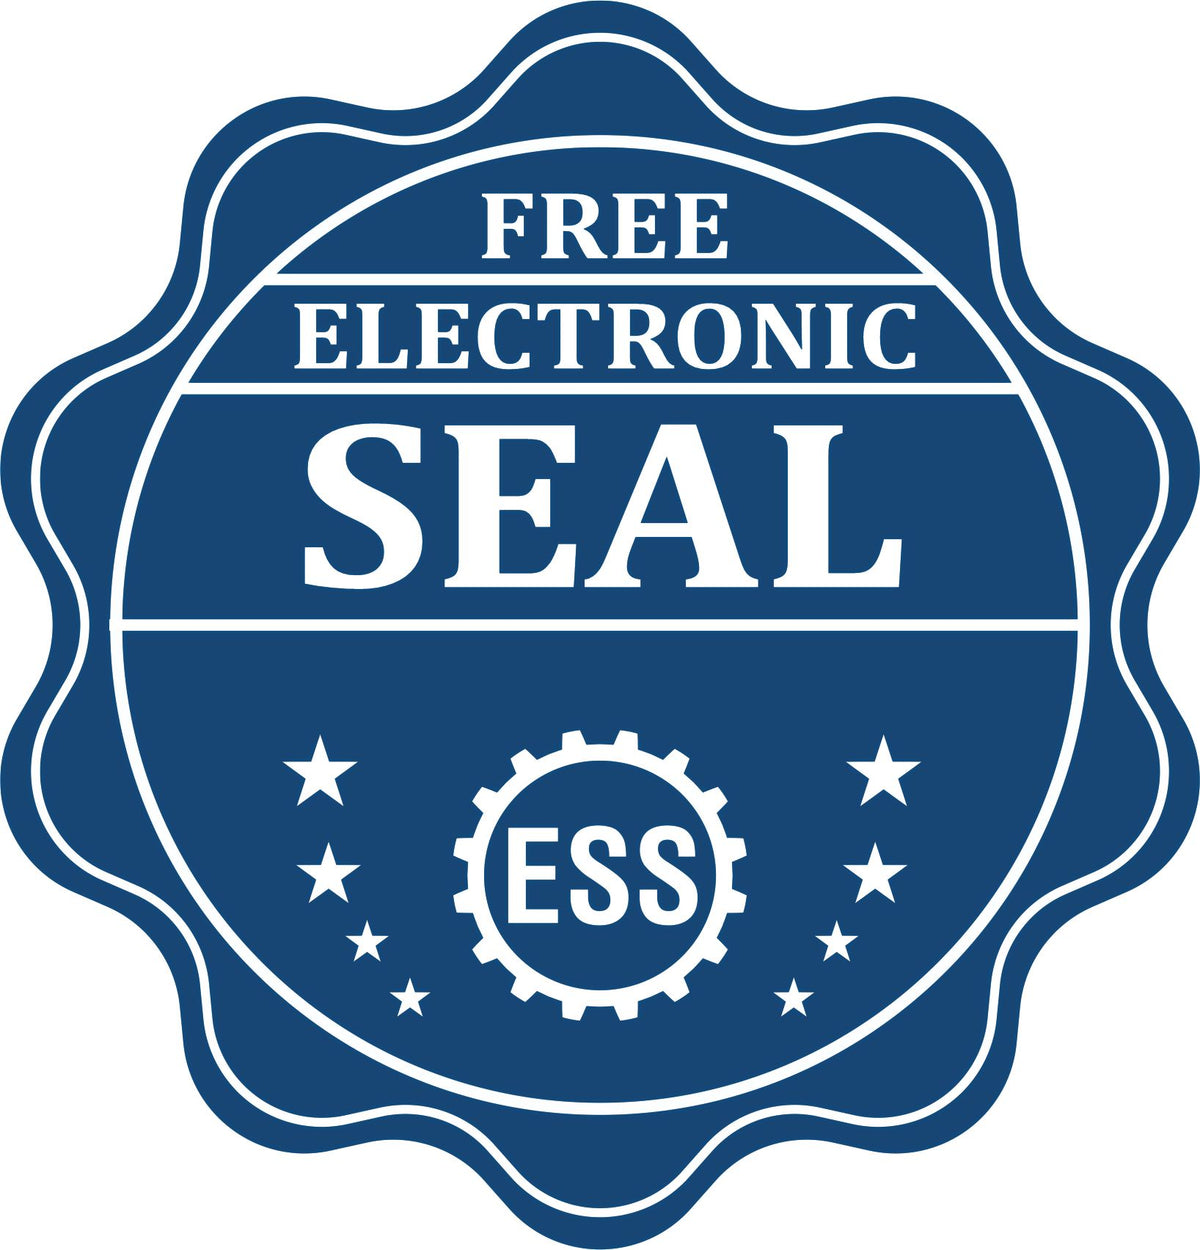 A badge showing a free electronic seal for the Premium MaxLight Pre-Inked Michigan Engineering Stamp with stars and the ESS gear on the emblem.